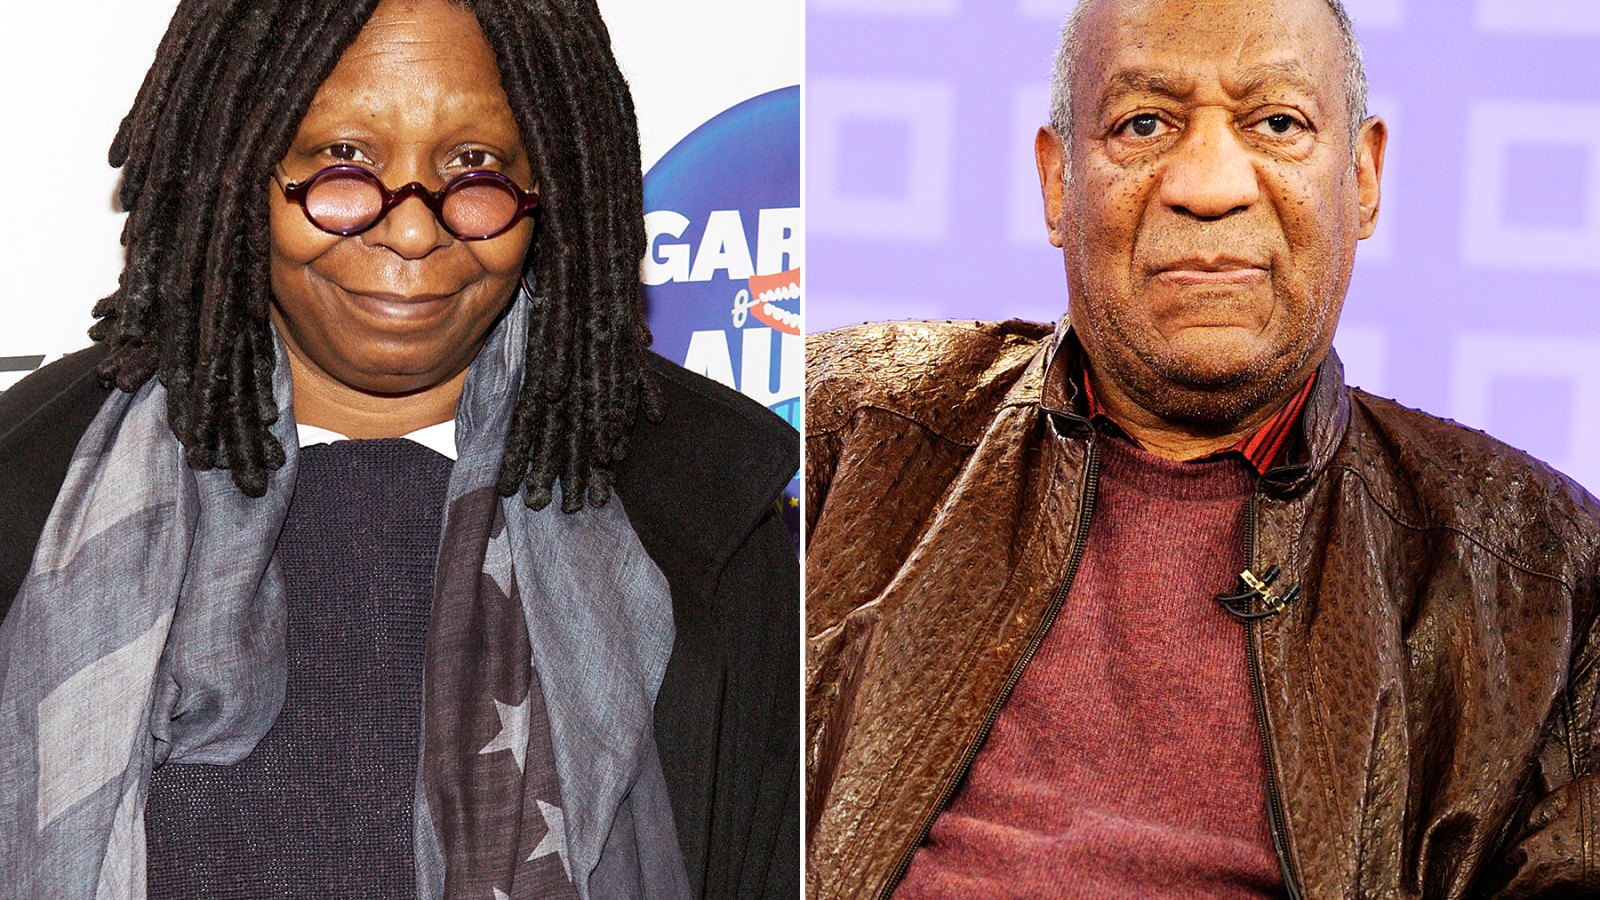 Whoopi Goldberg and Bill Cosby